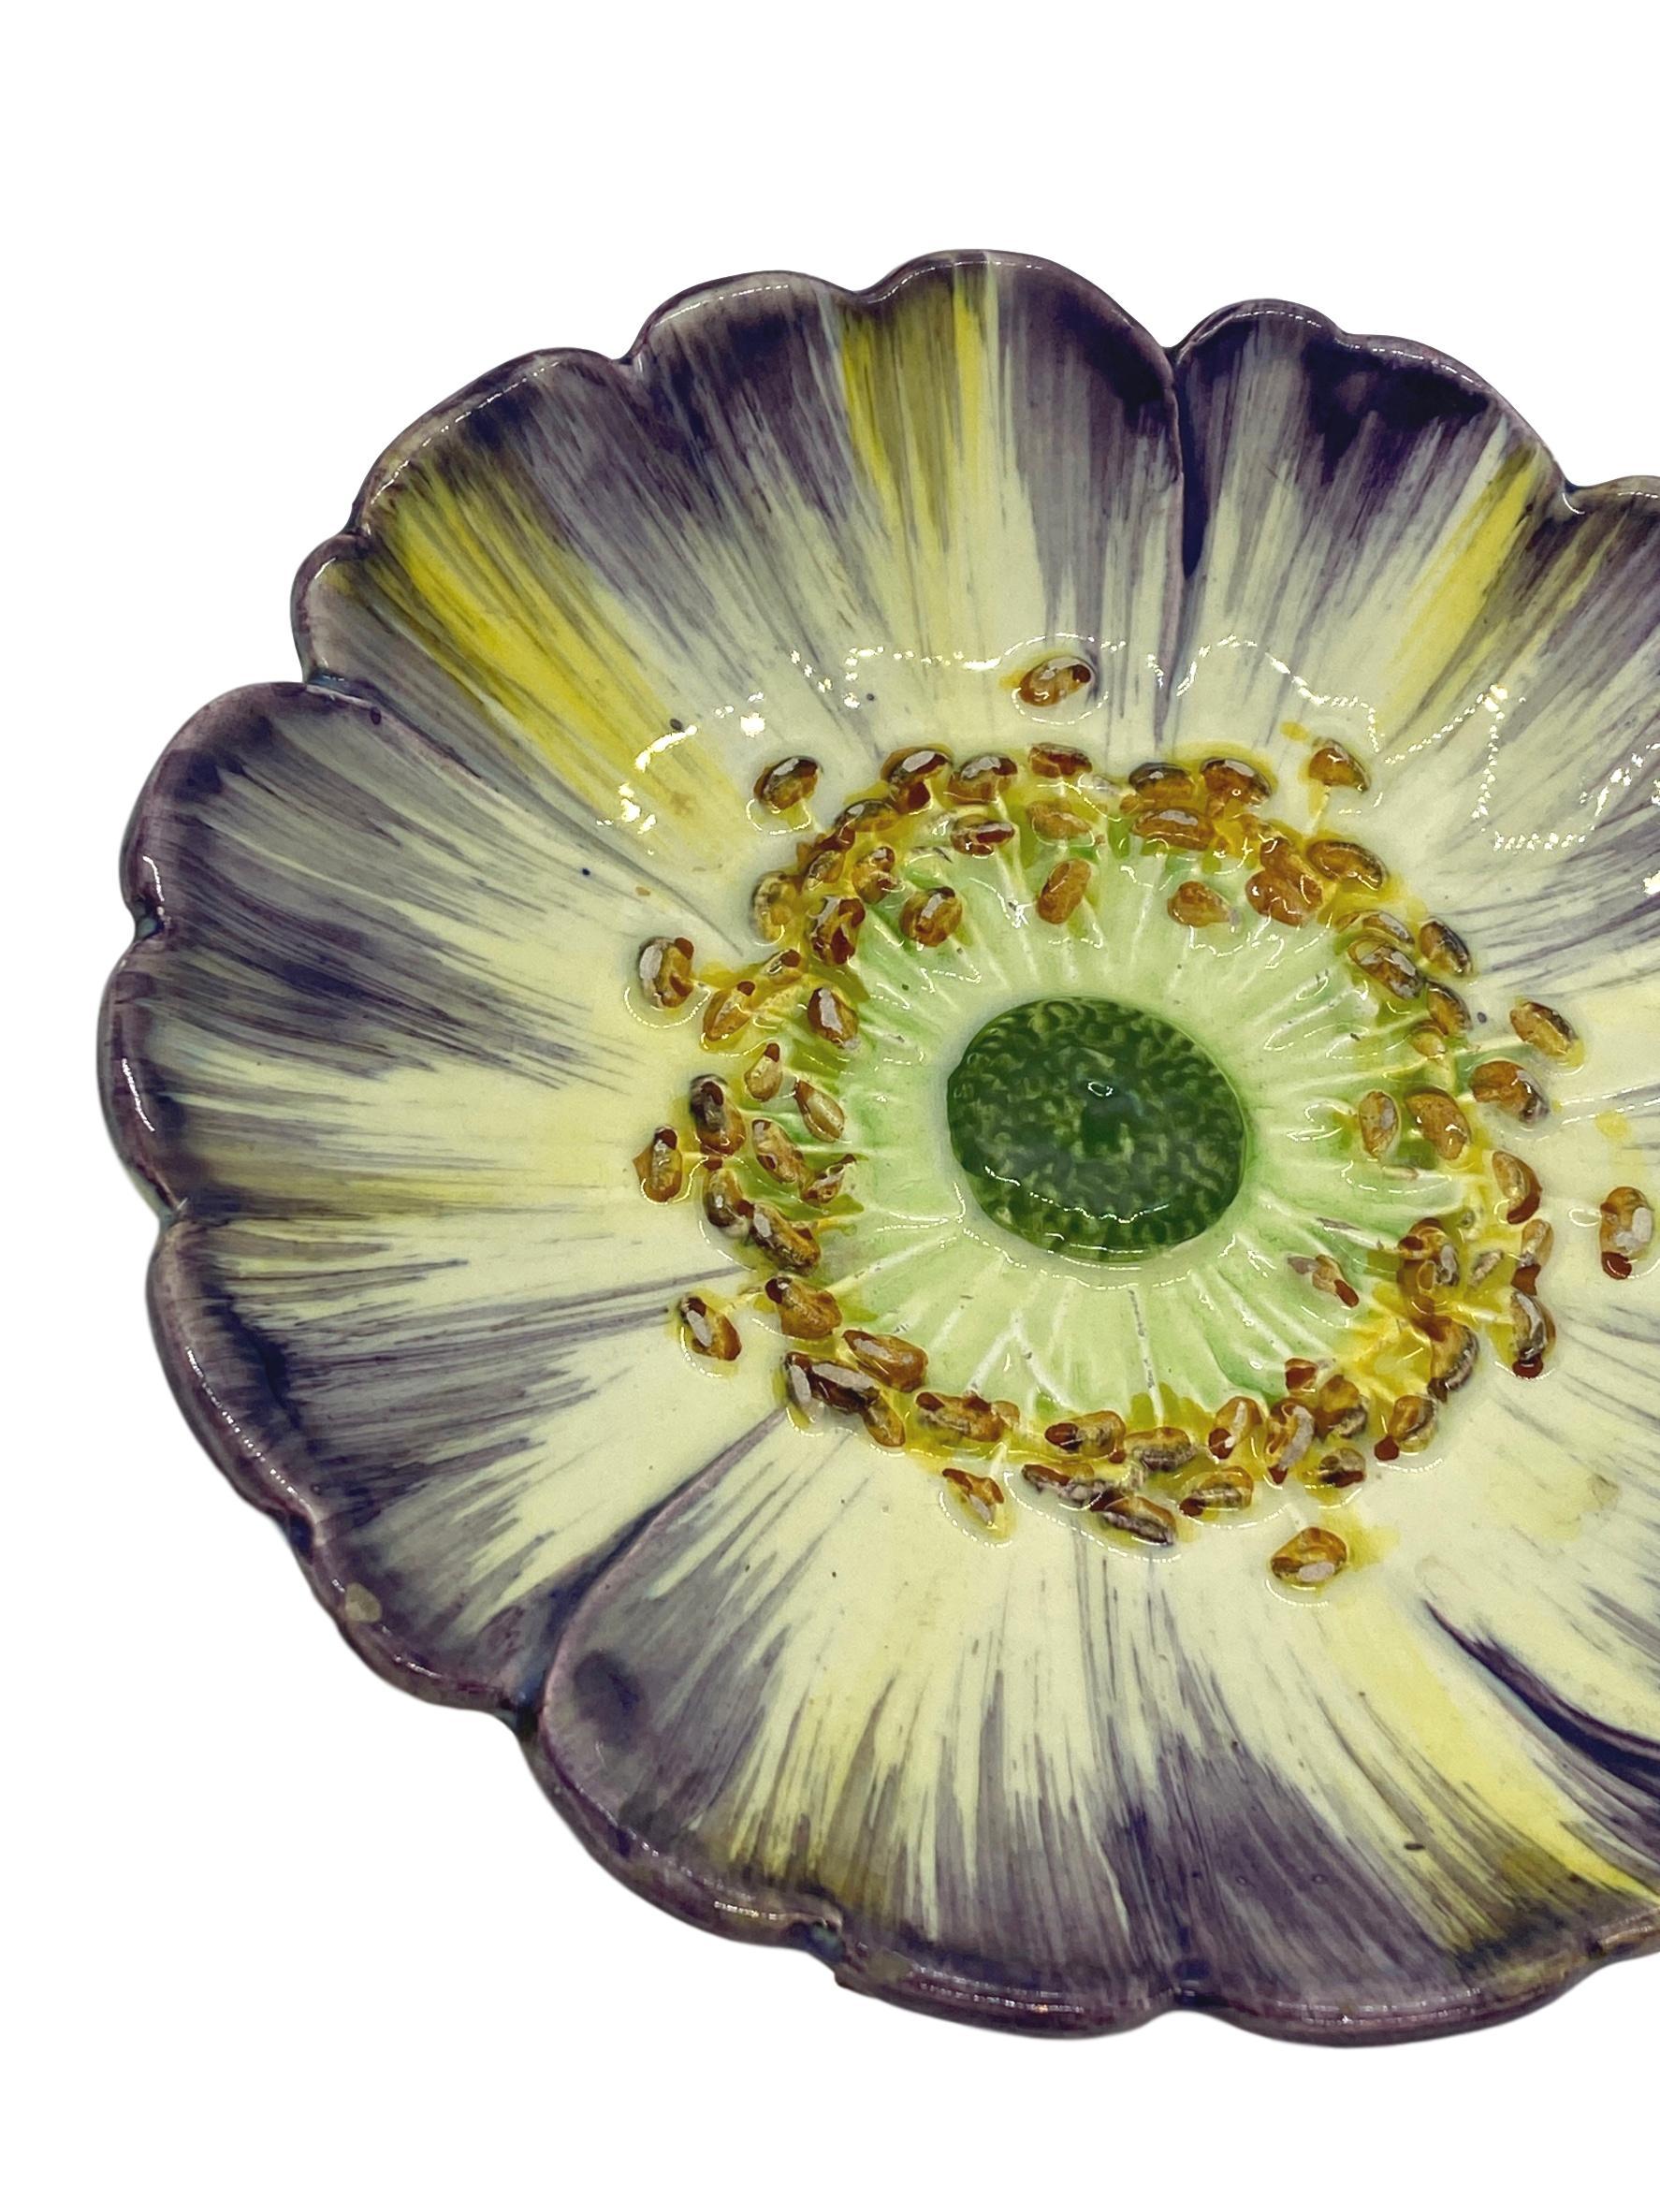 French Majolica Trompe L'oeil Purple Pansy Plate by Delphin Massier, circa 1870, measures: 8 inches.
For over 28 years we have been among the world's preeminent specialists in fine antique Majolica.
Book References:
Maryse Bottero, 